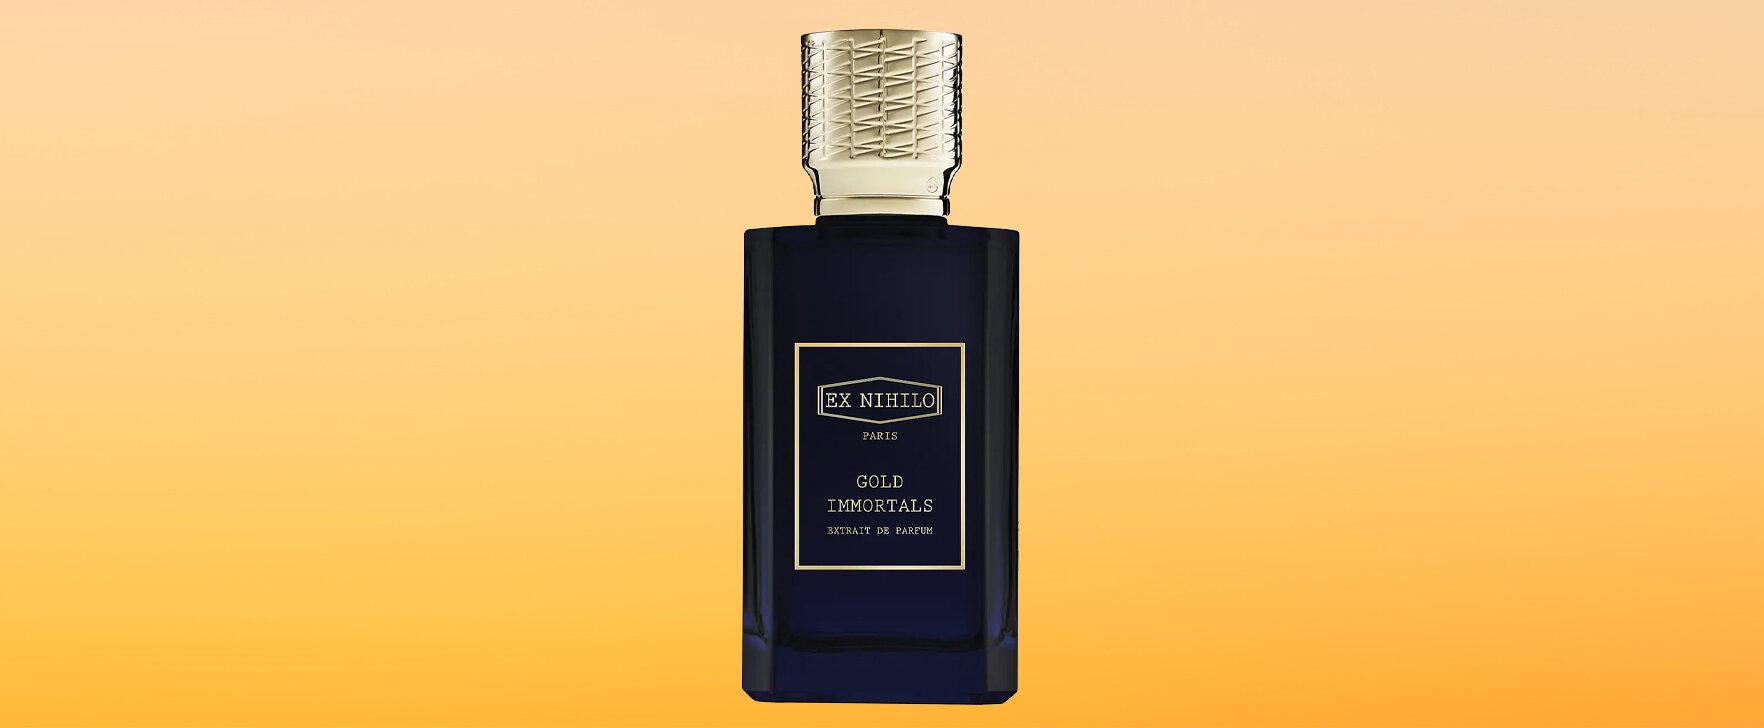 An Intensified Fragrance Experience: "Gold Immortals (Extrait de Parfum)" by Ex Nihilo